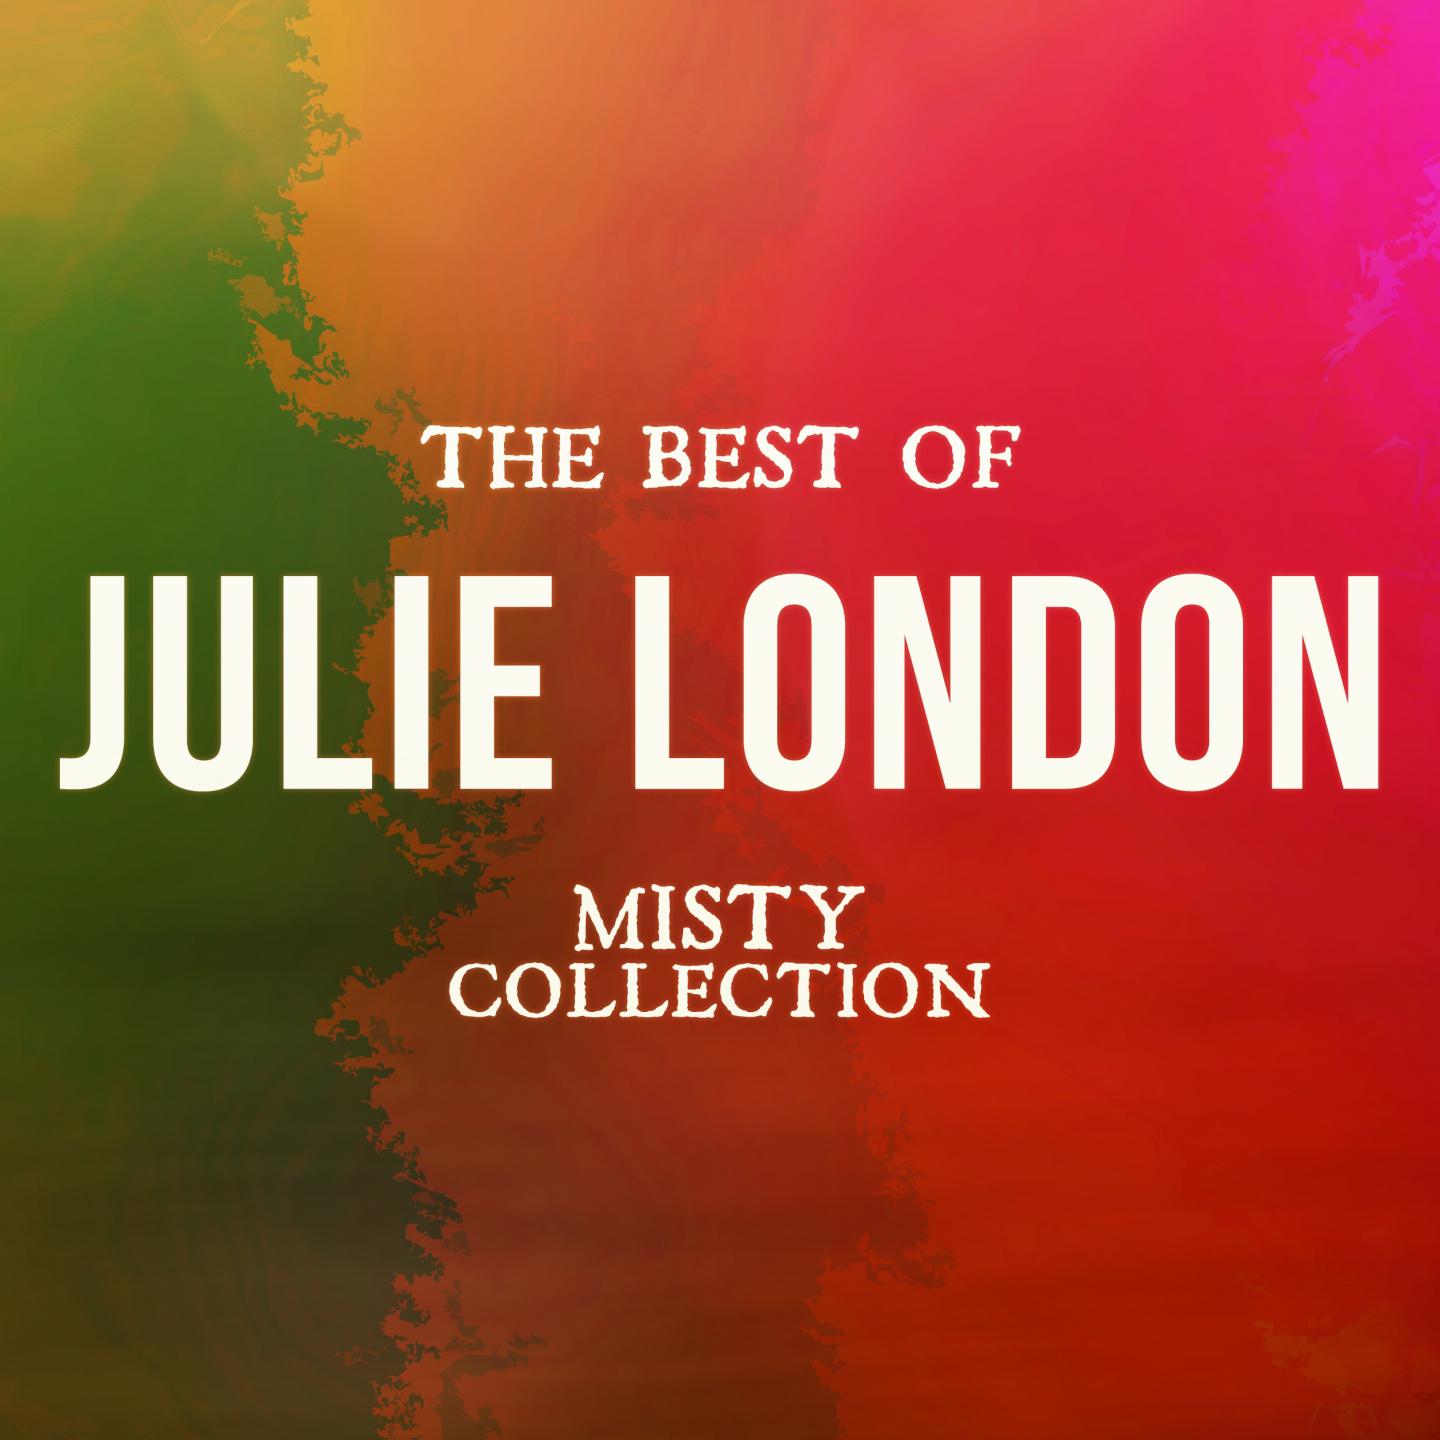 The Best of Julie London (Misty Collection)专辑